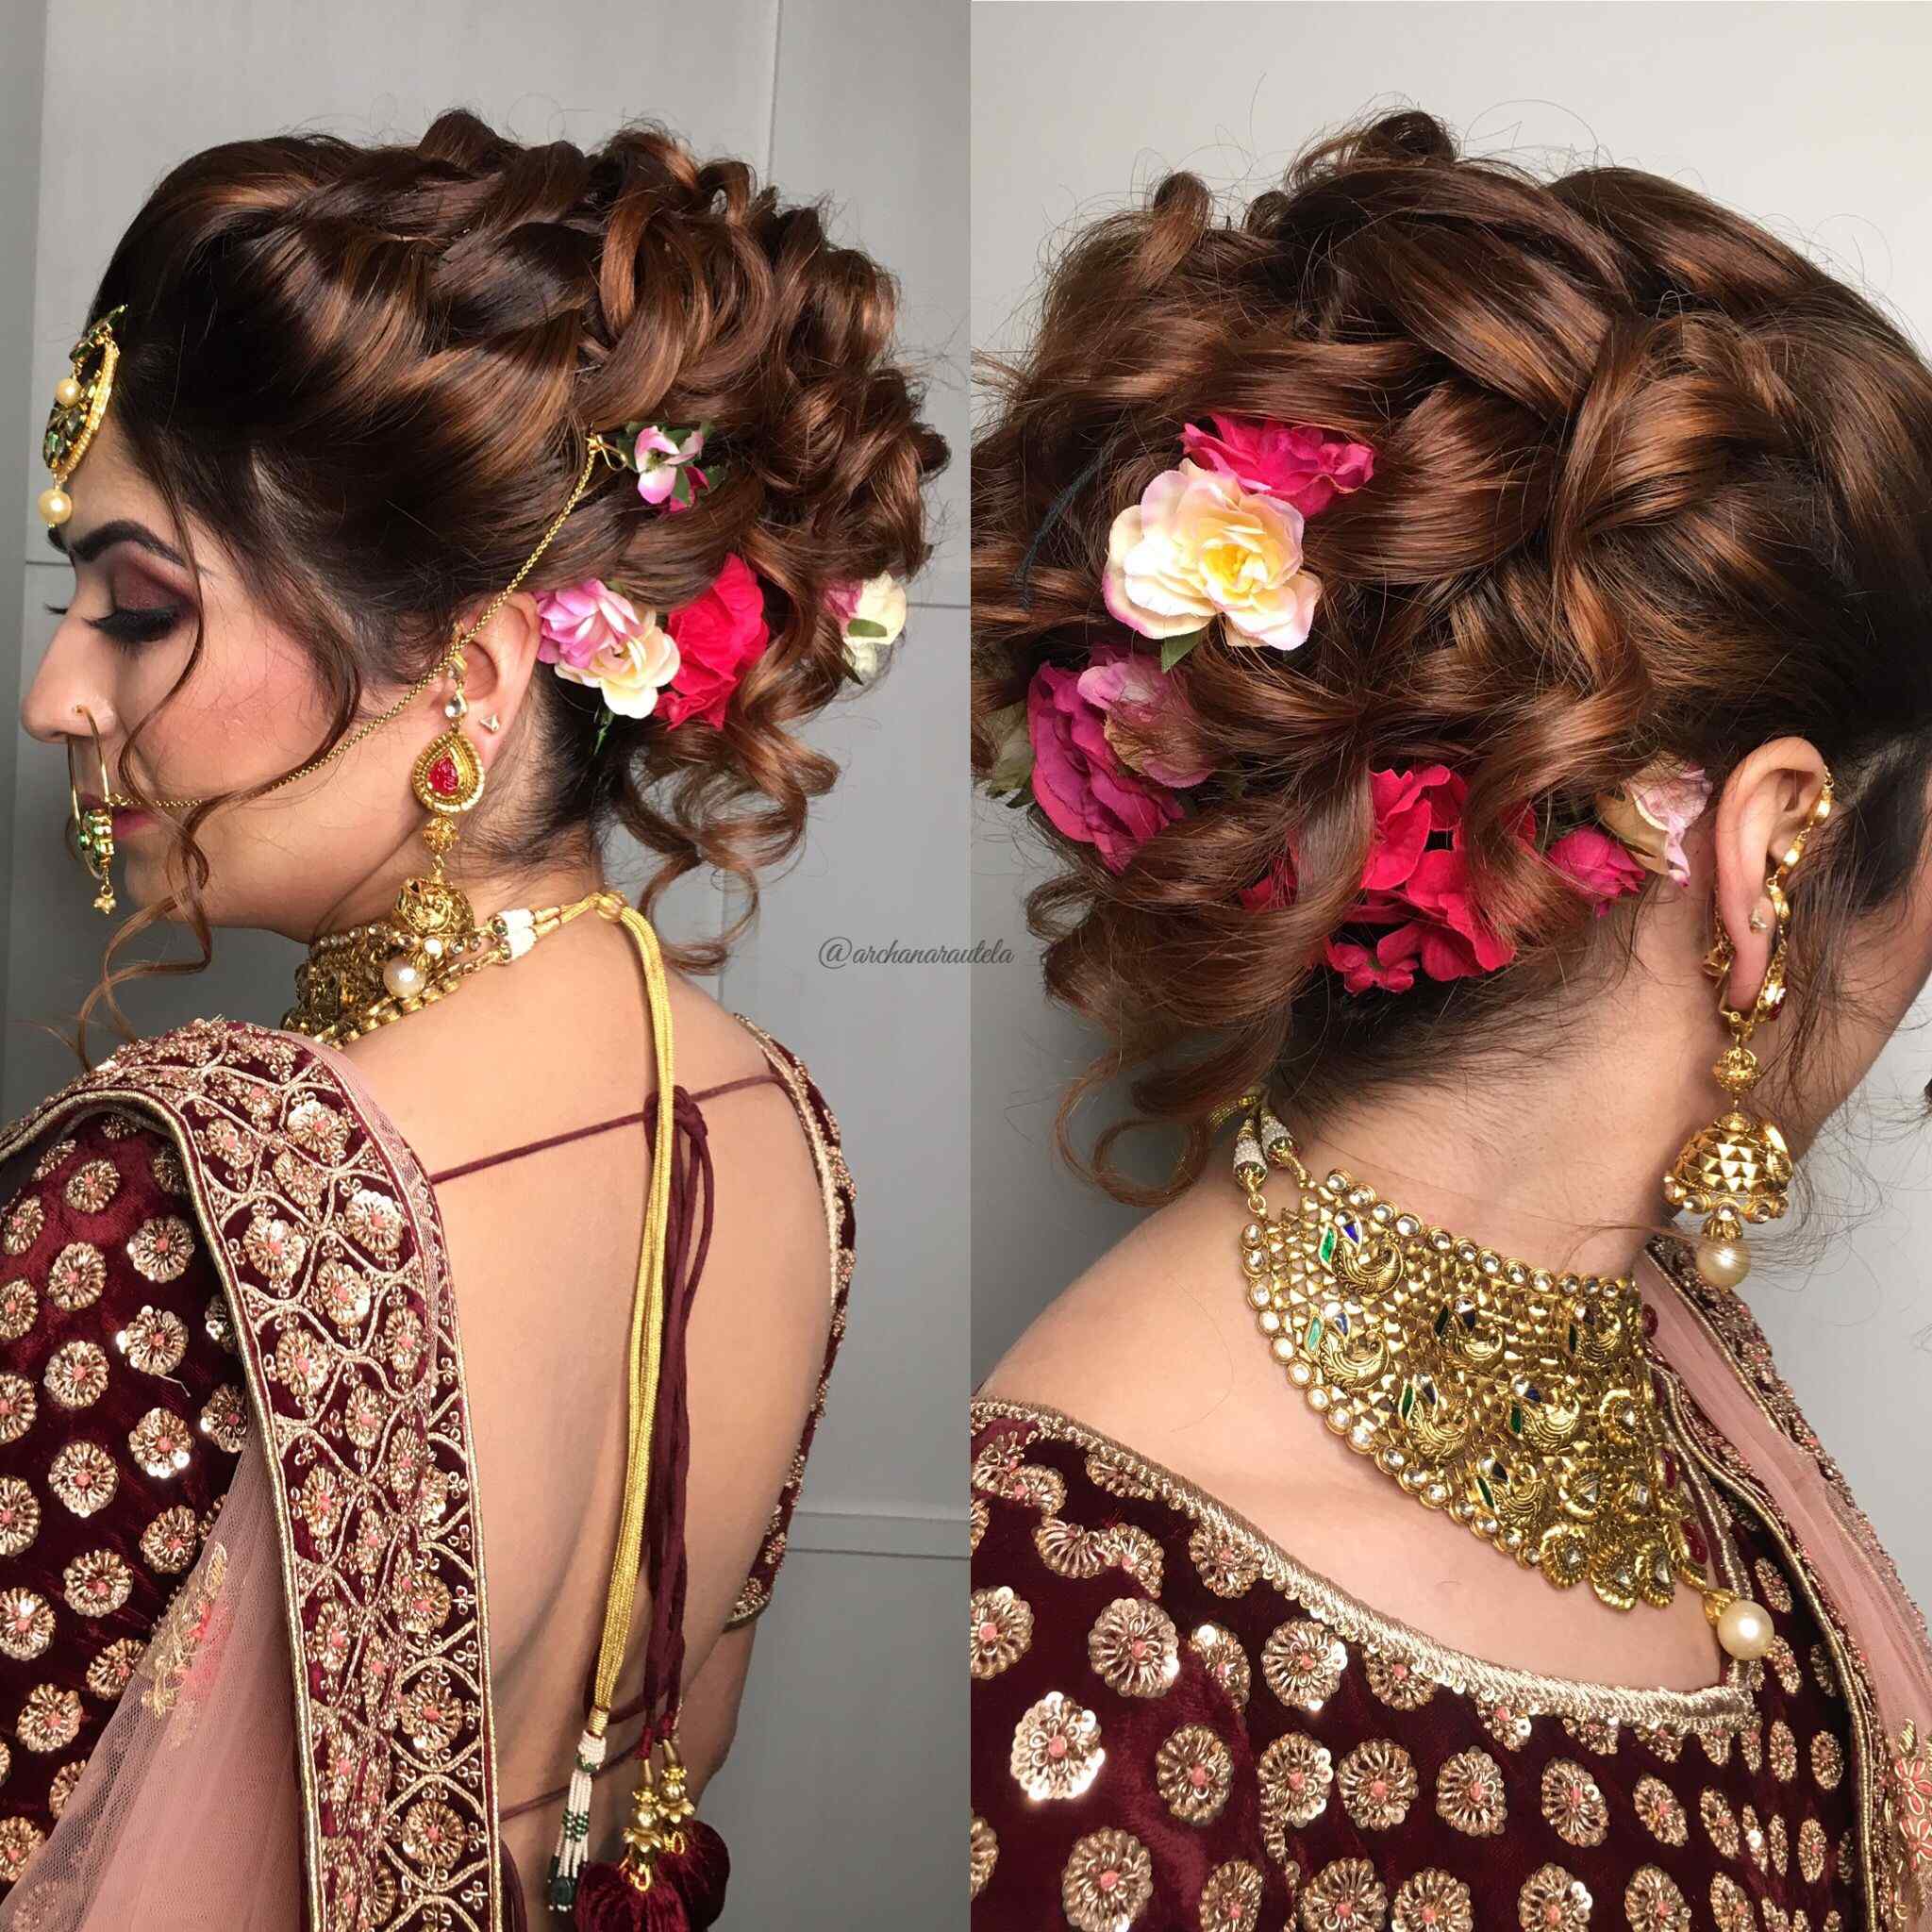 Pin by pritam patil on sona | Bridal hairstyle indian wedding, Indian  wedding bride, Bridal photoshoot